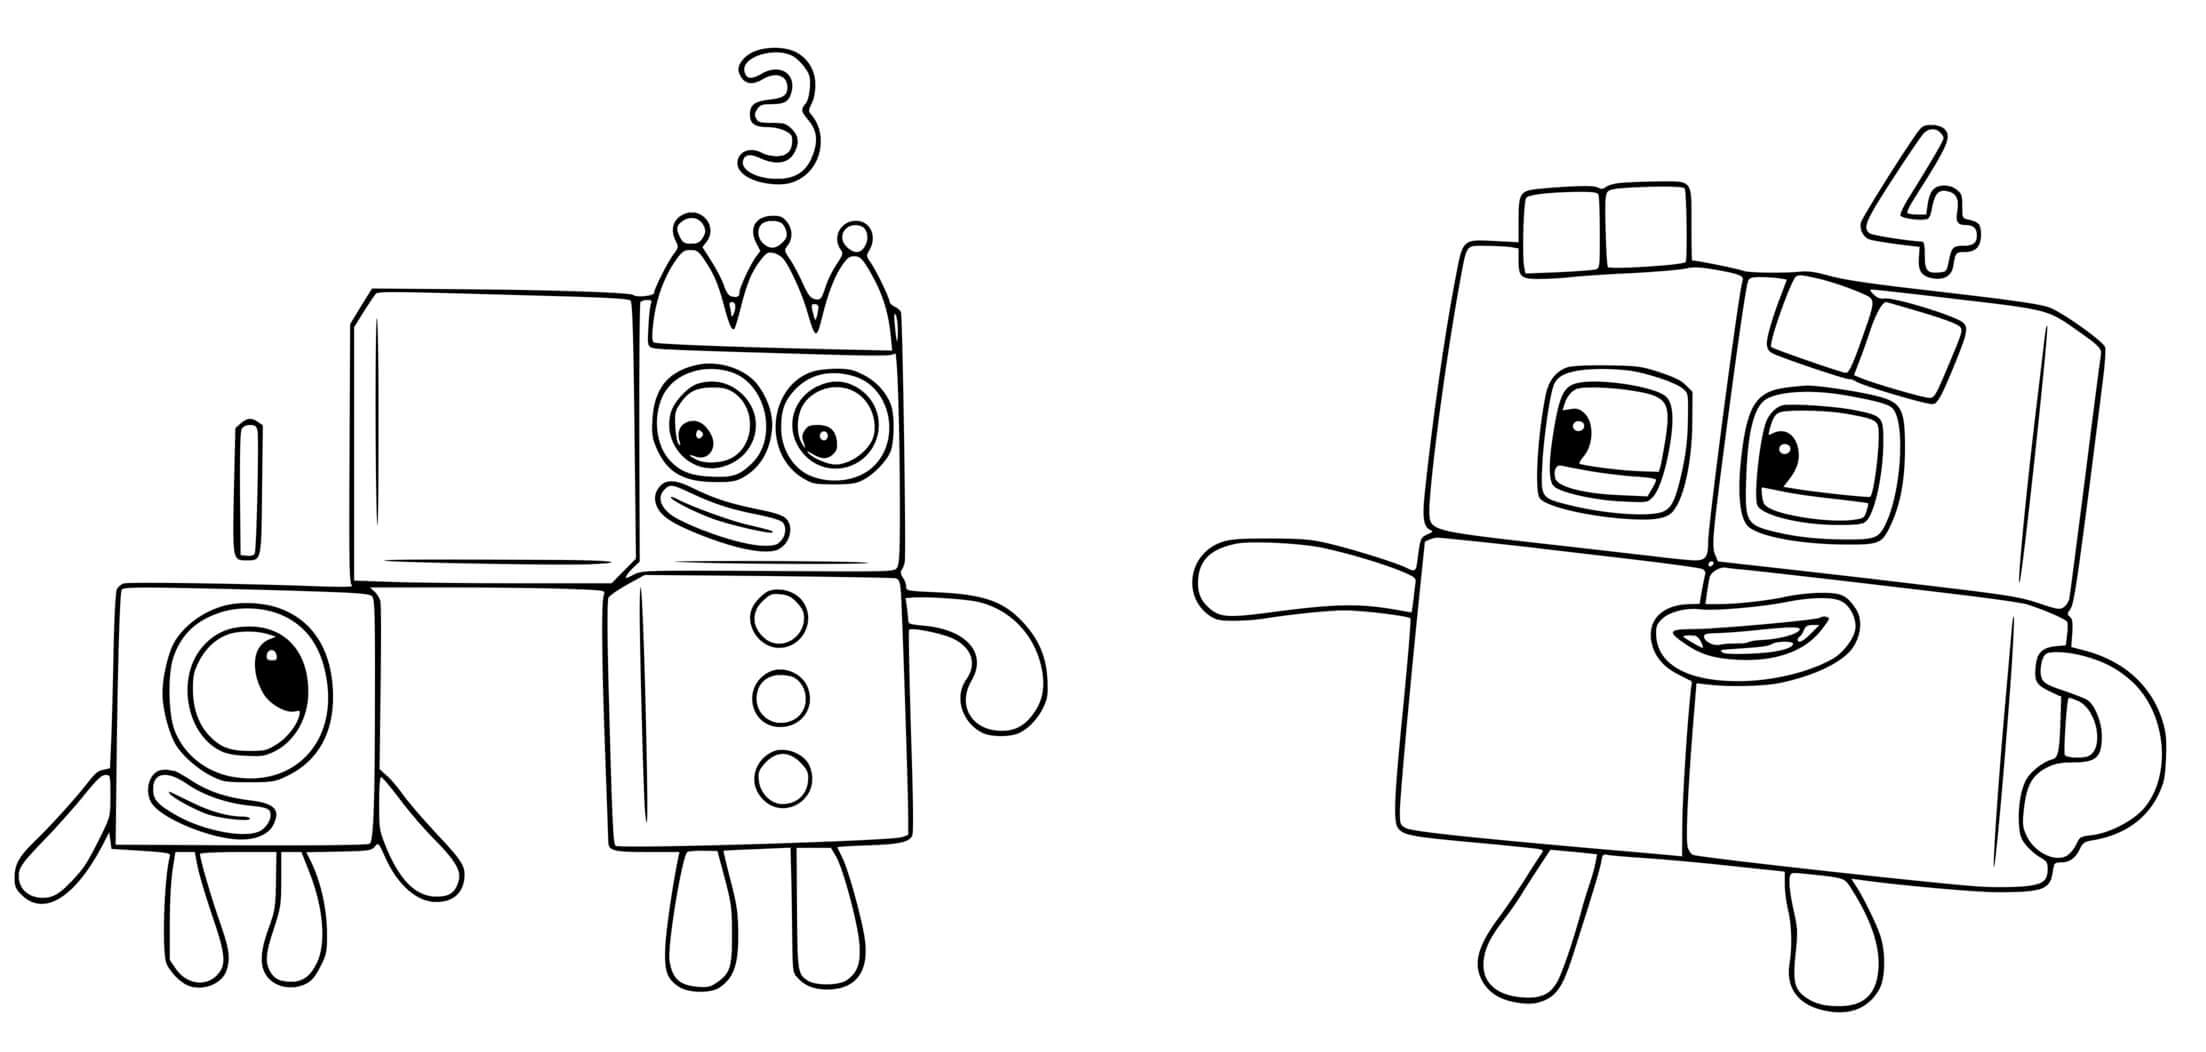 Numberblocks 1 3 4 One Two Four